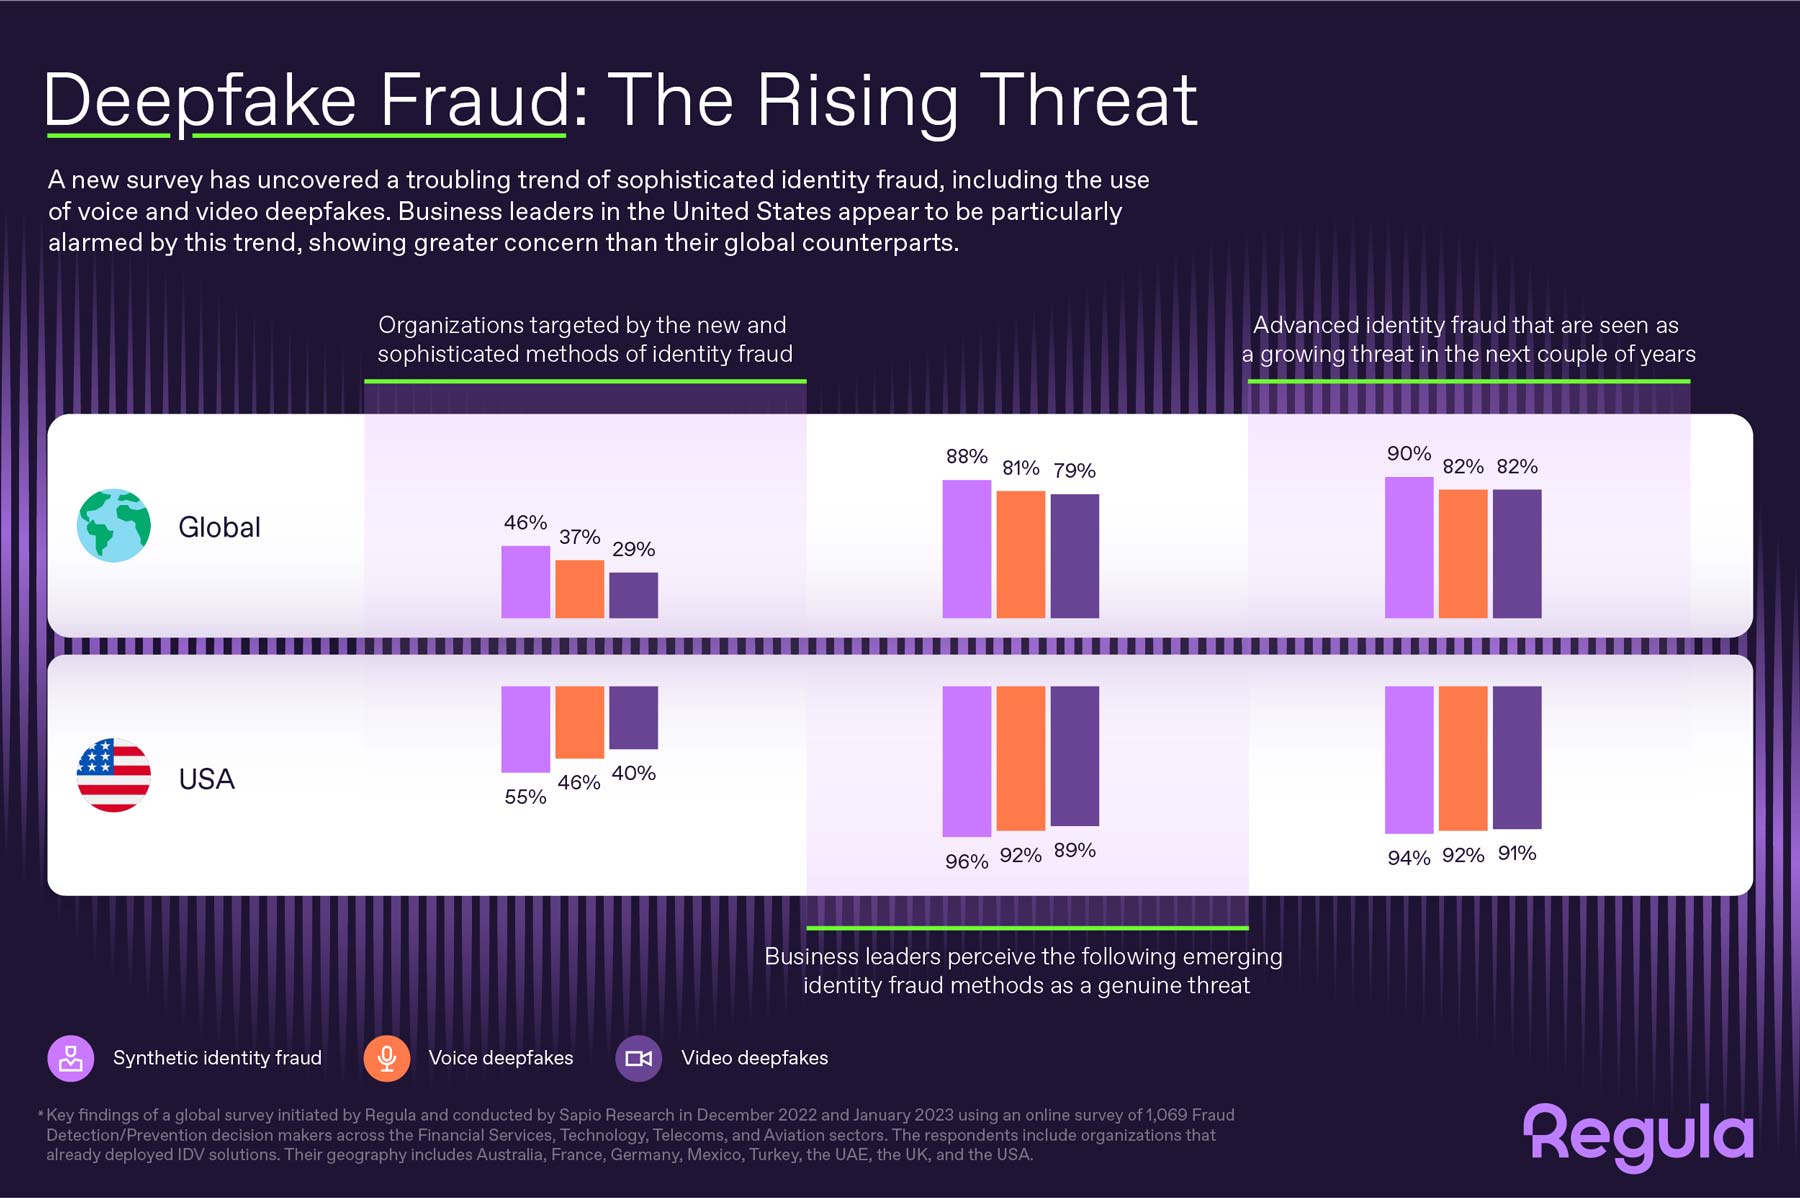 Forensic devices and identity verification solutions provider Regula has issued a survey showcasing that AI-generated identity fraud like deepfakes affects a third of businesses.